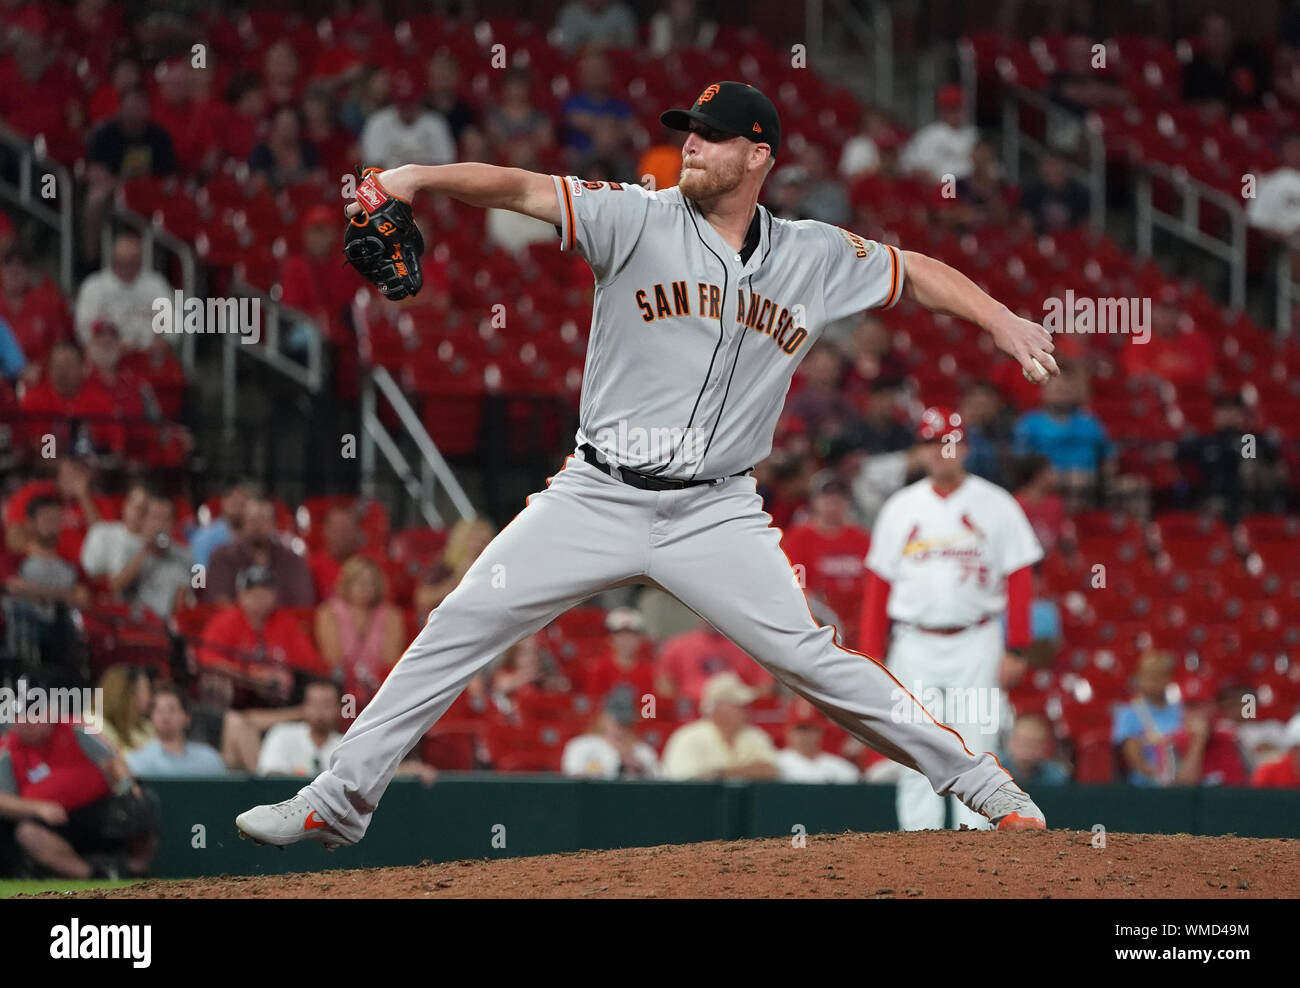 San Francisco Giants pitcher Will Smith delivers a pitch to the St. Louis Cardinals in the ninth inning at Busch Stadium in St. Louis on Wednesday, September 4, 2019. San Francisco defeated St. Louis, 9-8.  Photo by Bill Greenblatt/UPI Stock Photo